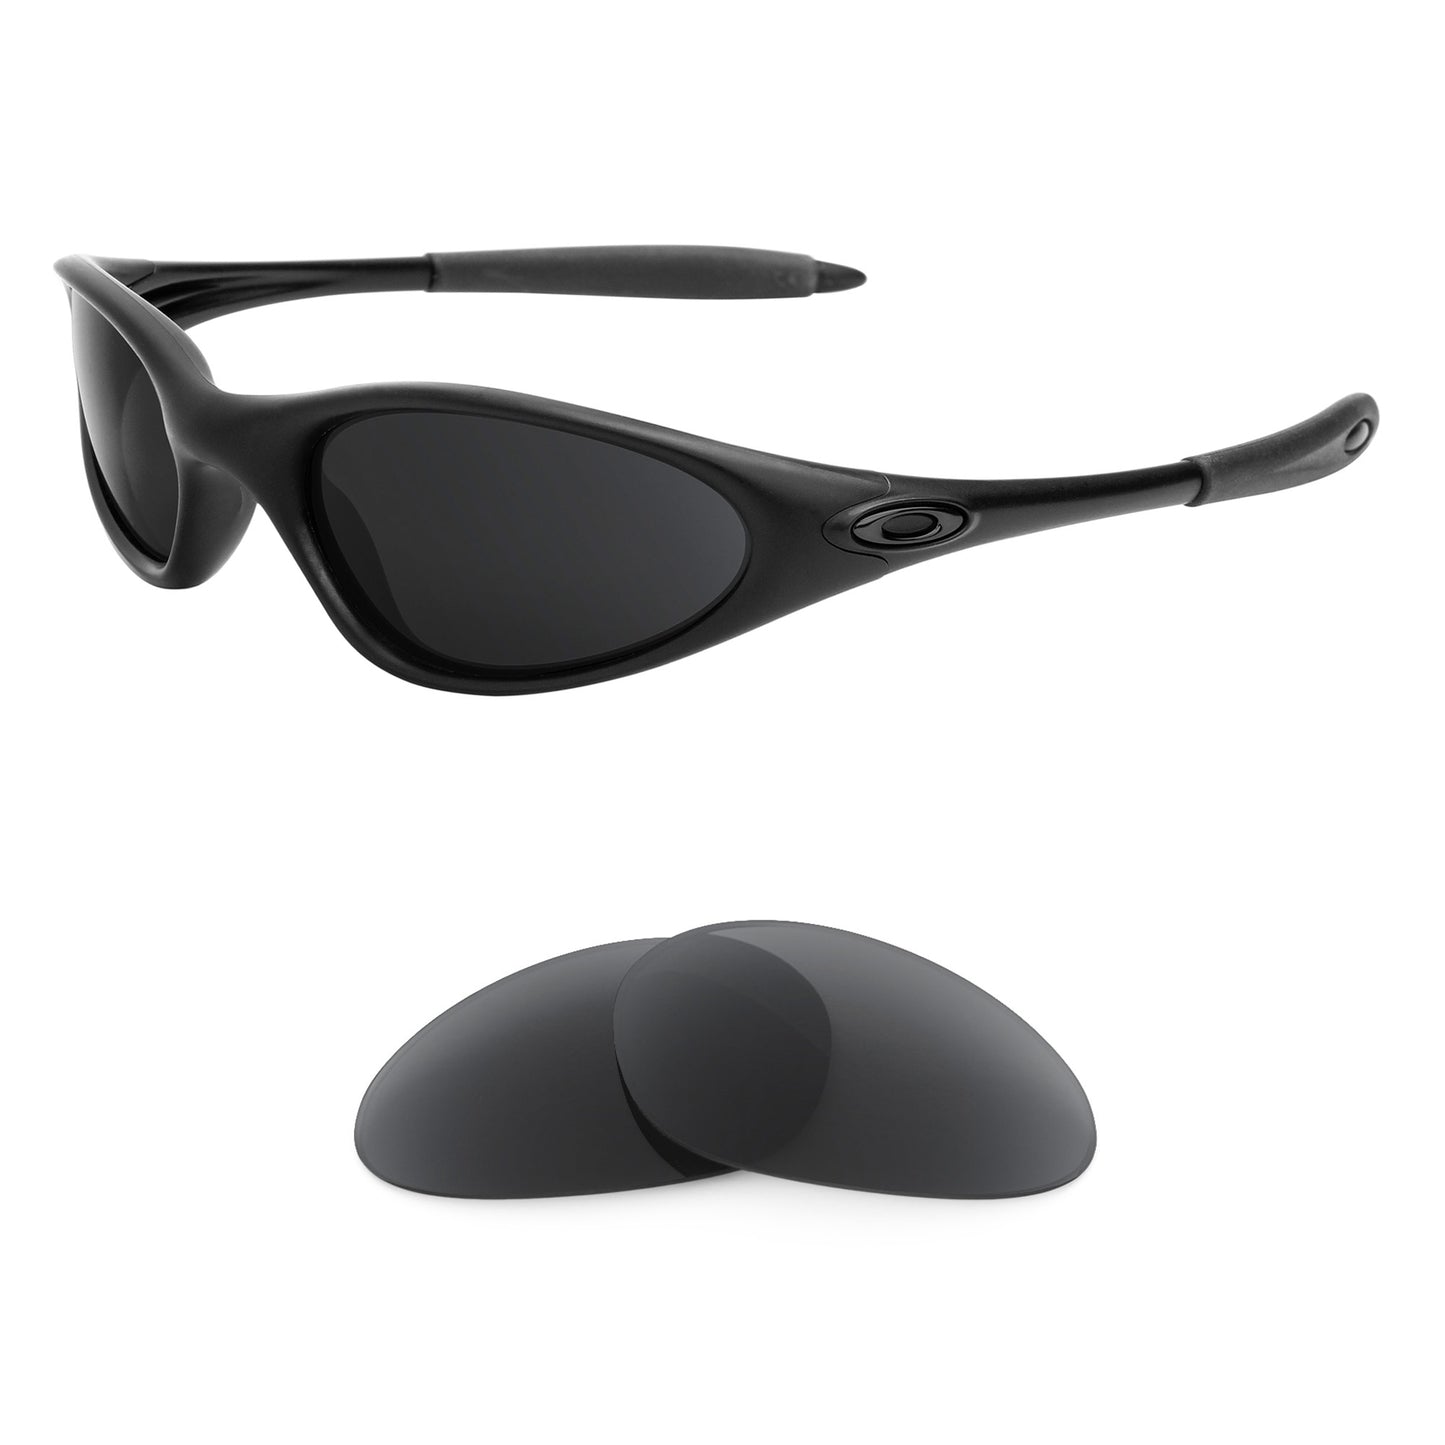 Oakley Minute 1.0 sunglasses with replacement lenses